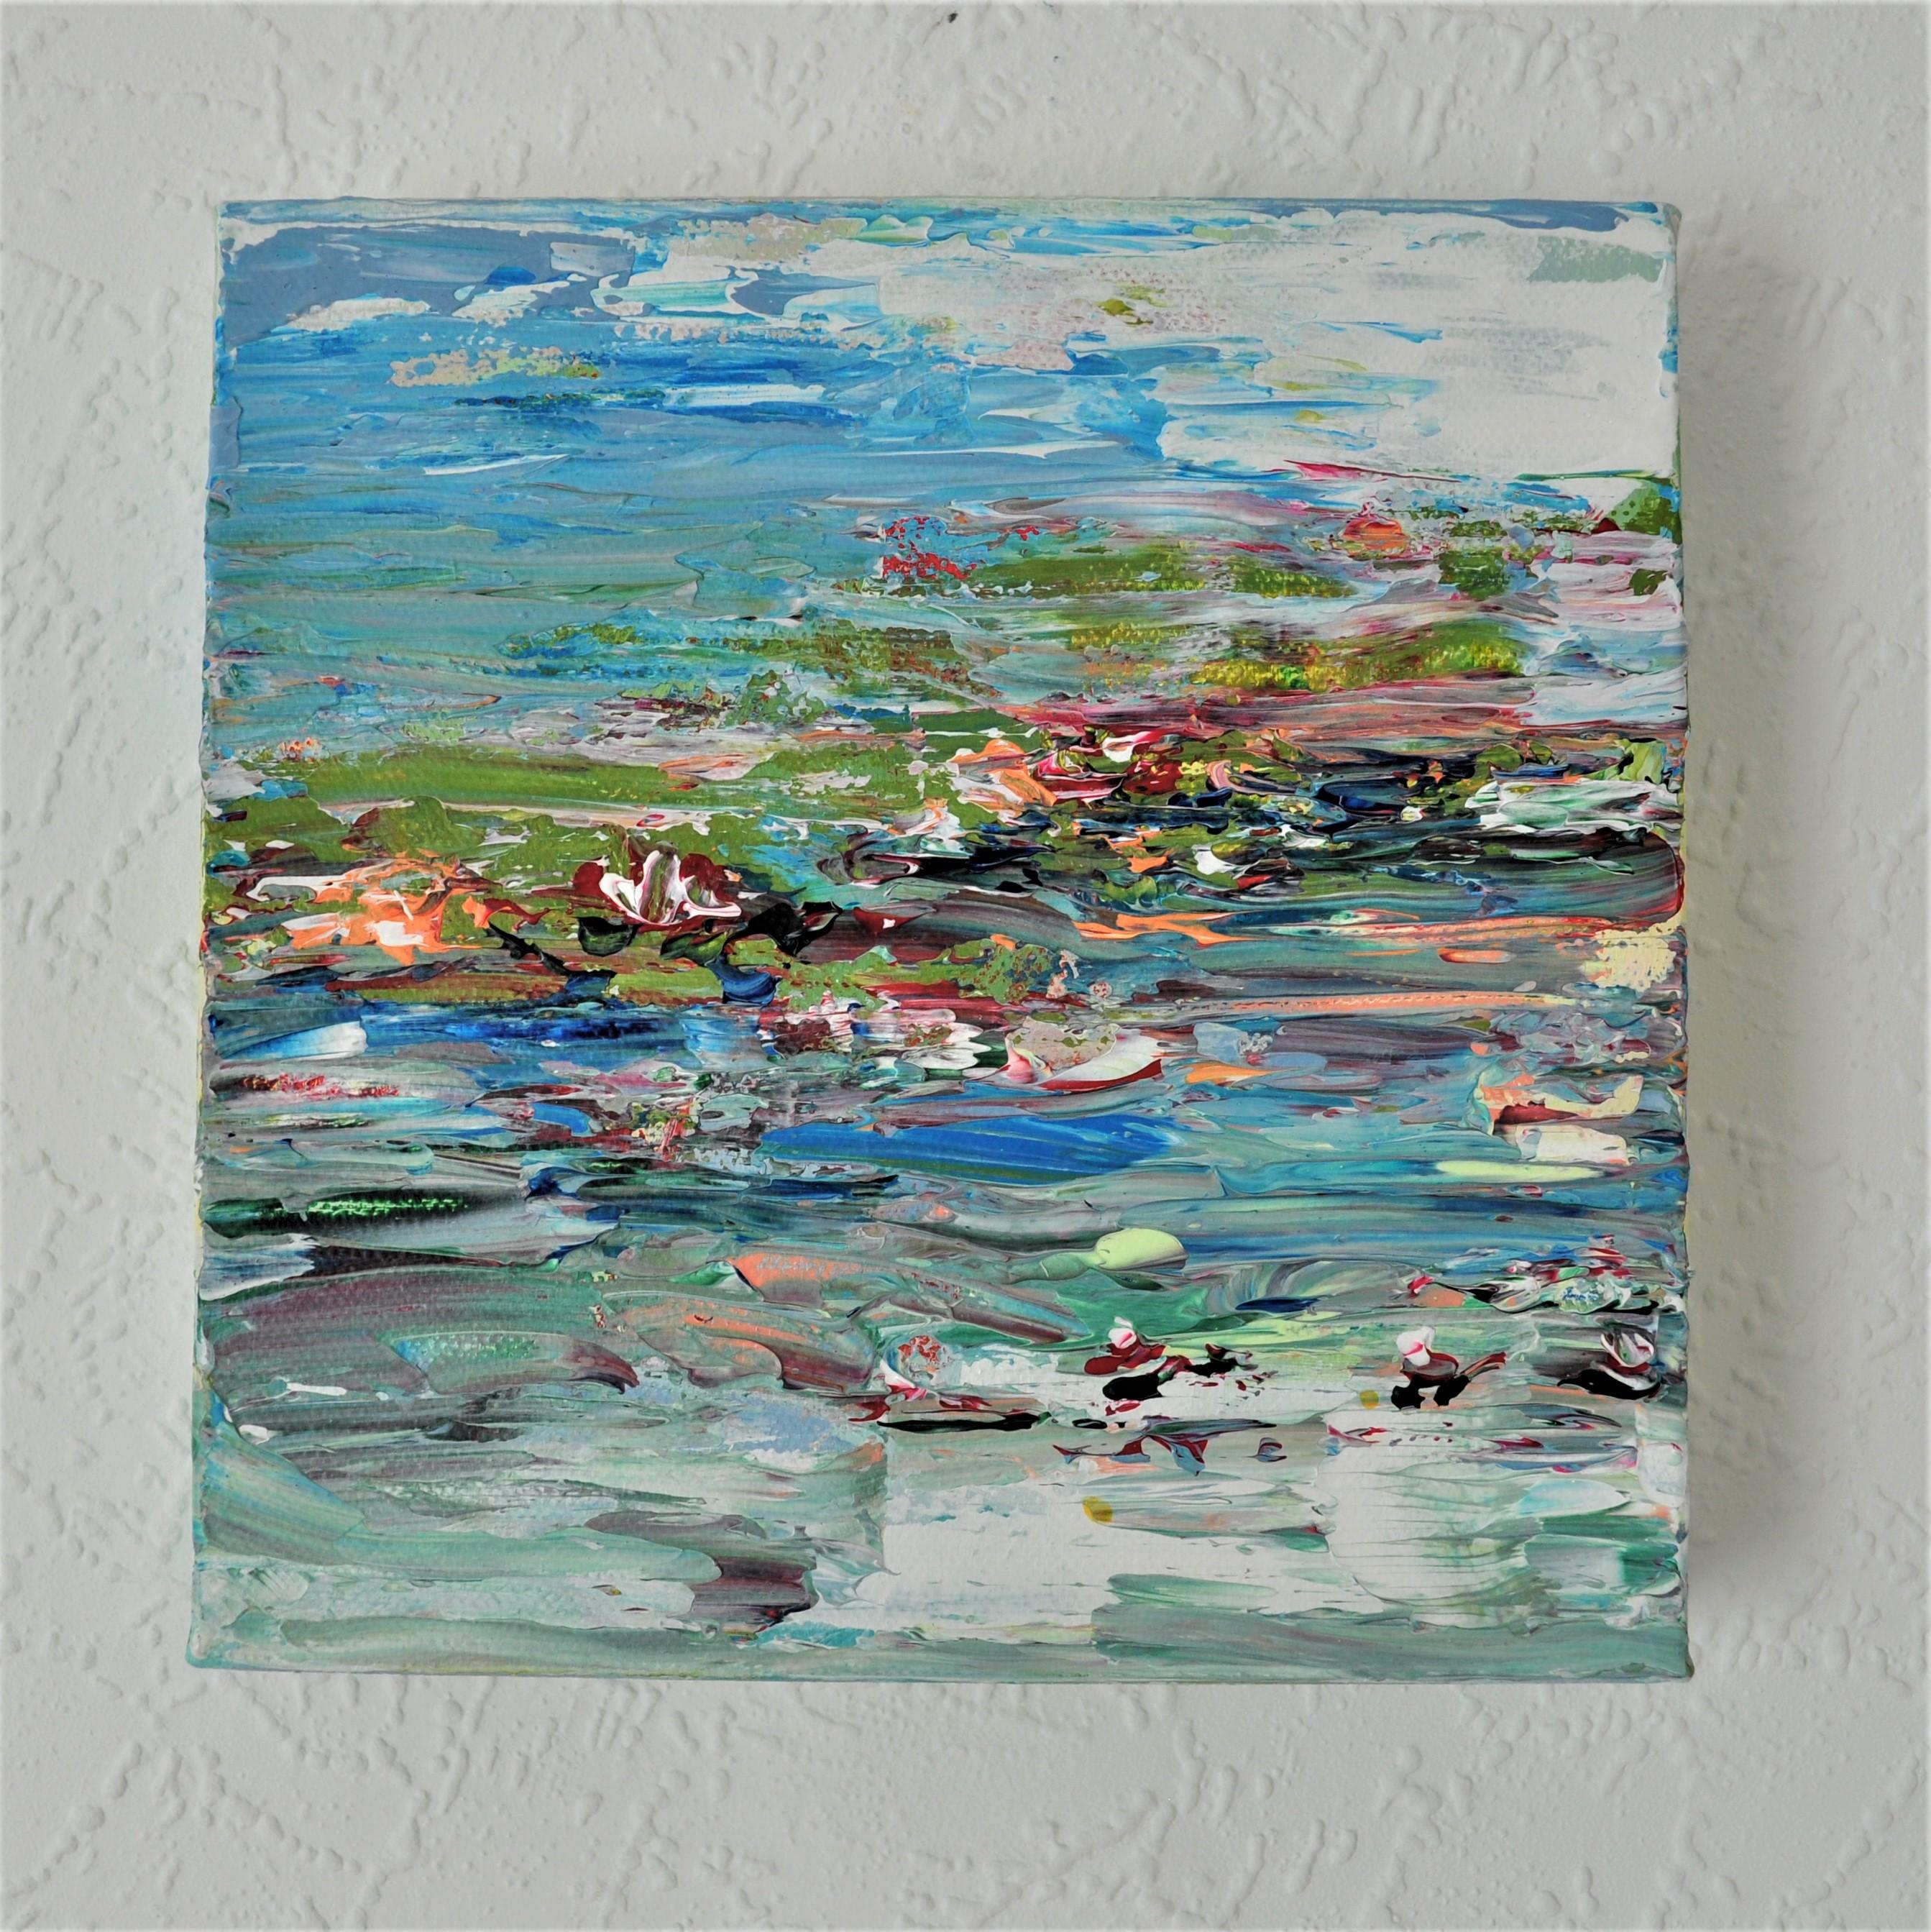 Diane Whalley
The Summer Pond
Acrylic Paint on Canvas
Sold Unframed
(Please note that in situ images are purely an indication of how a piece may look).

The Summer Pond is an original colourful abstract water scene by emerging abstract expressionist